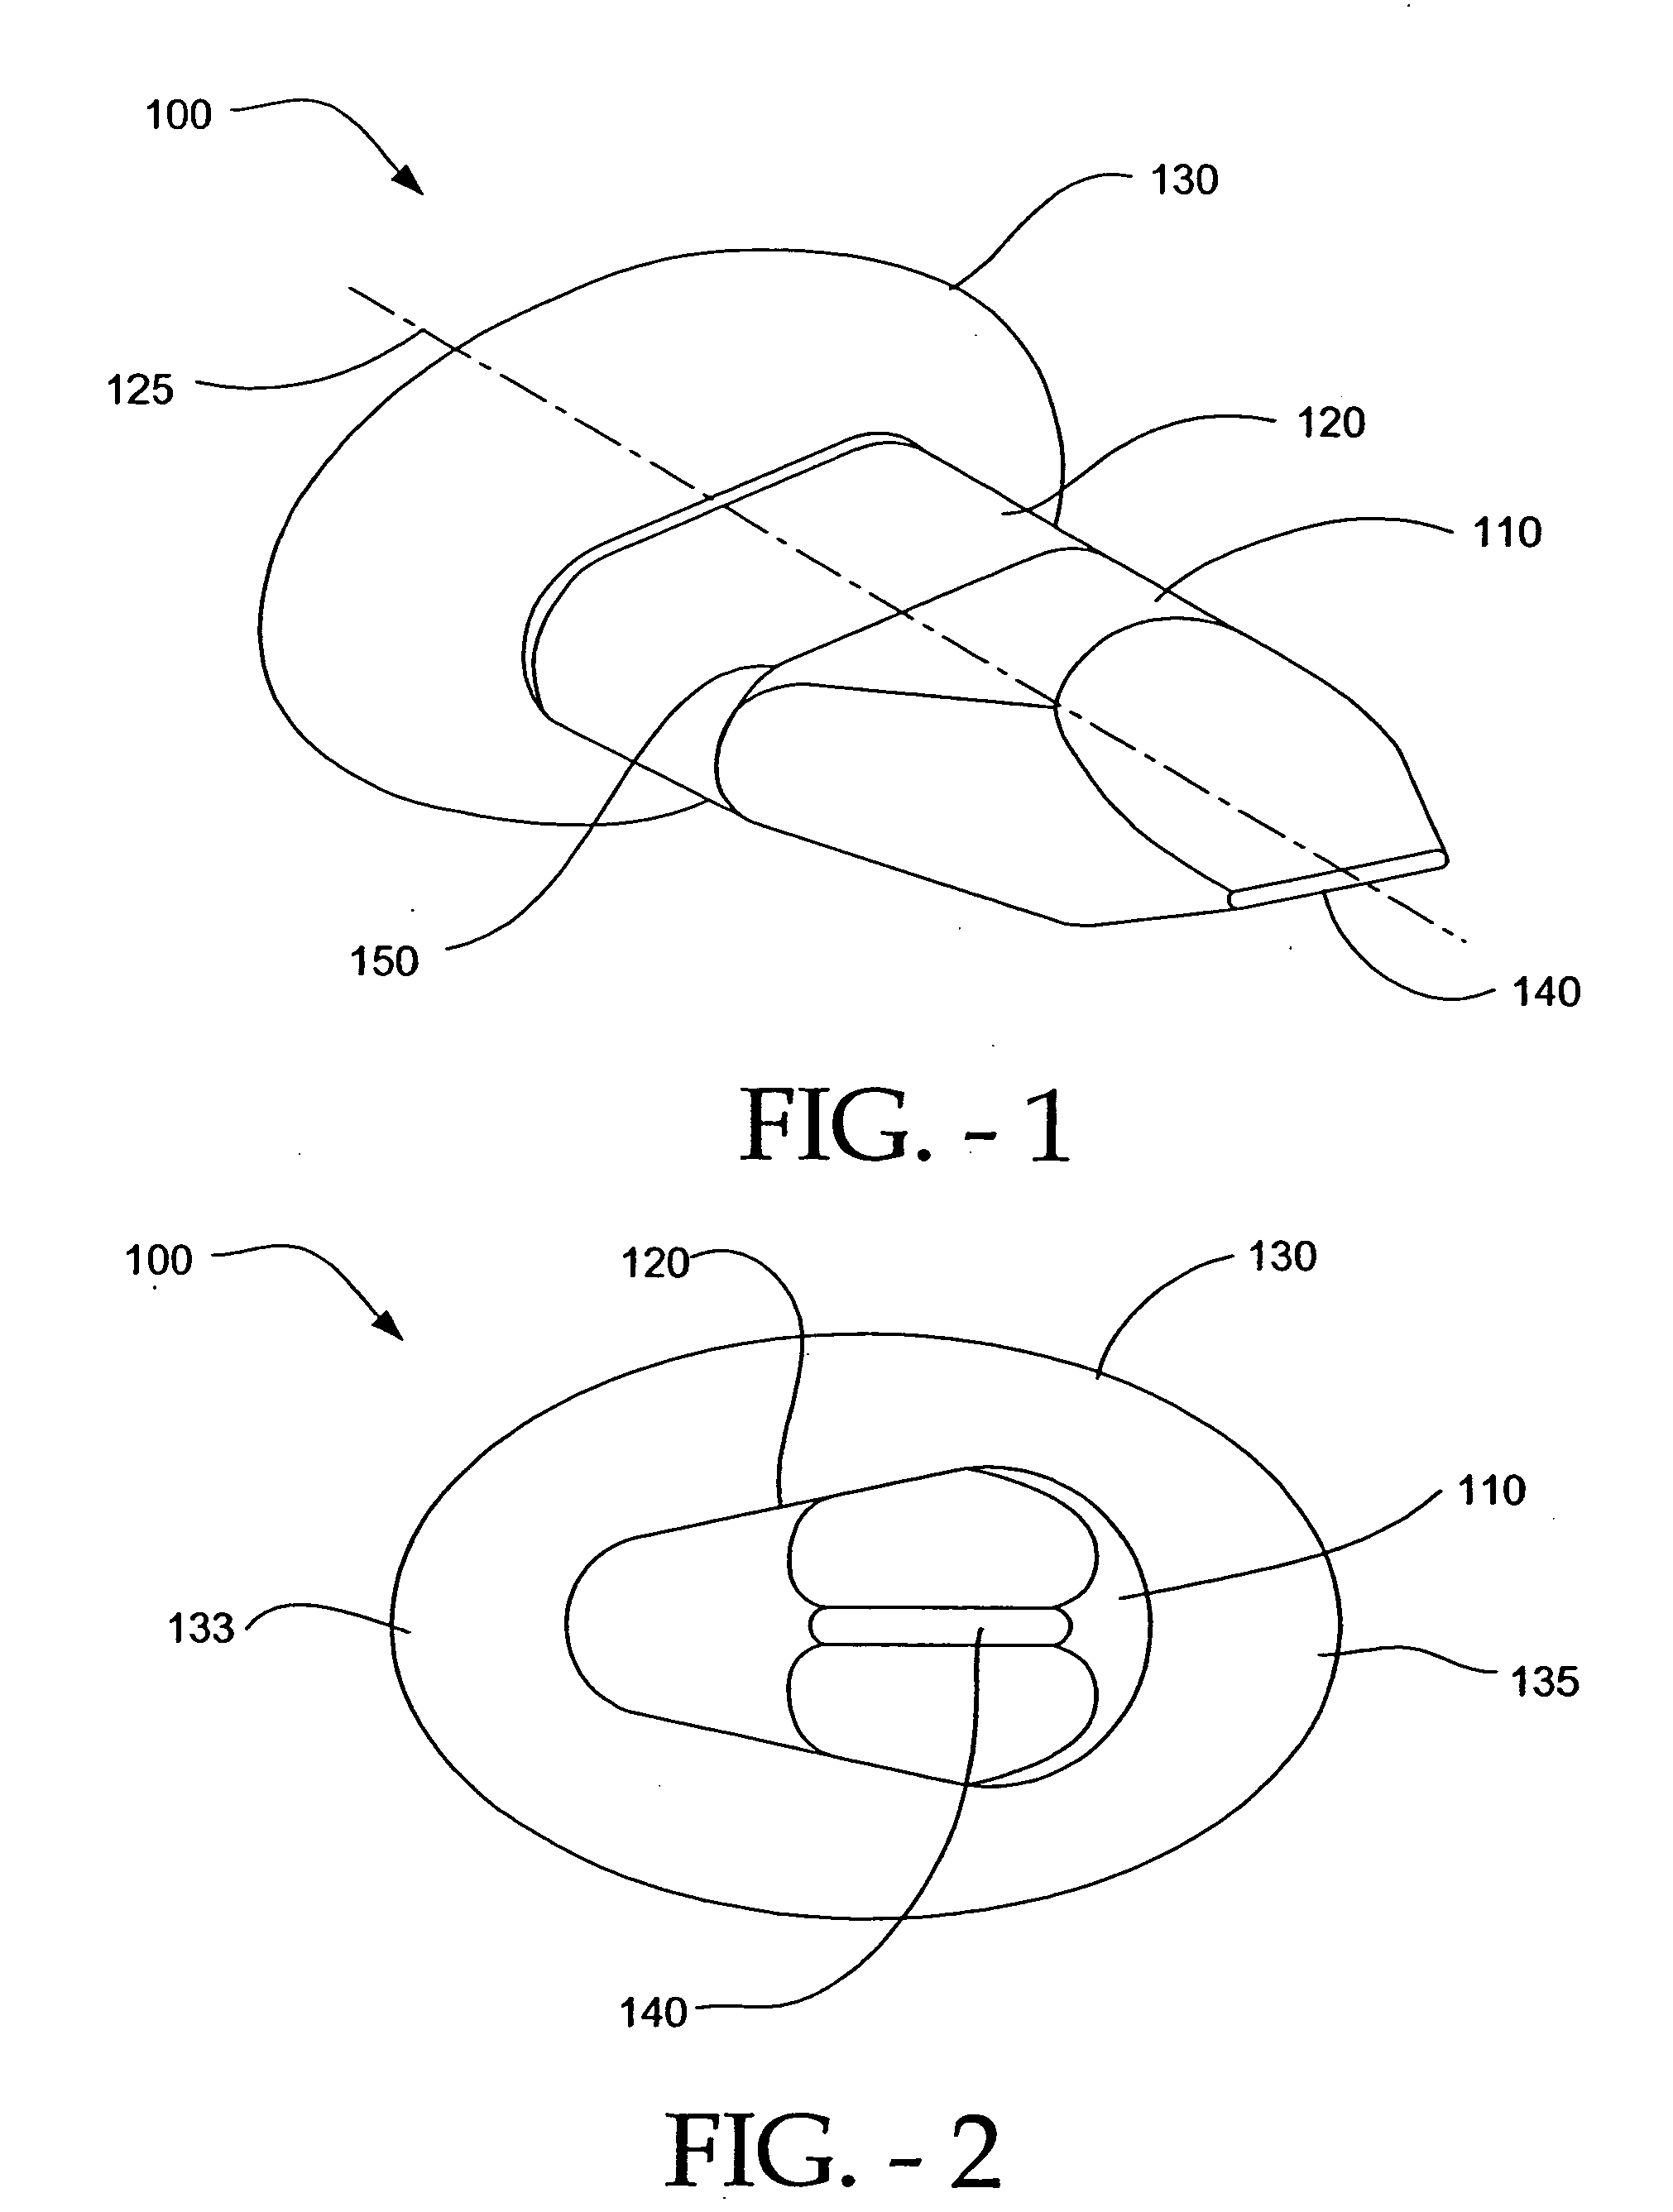 Interspinous process implant having deployable wings and method of implantation